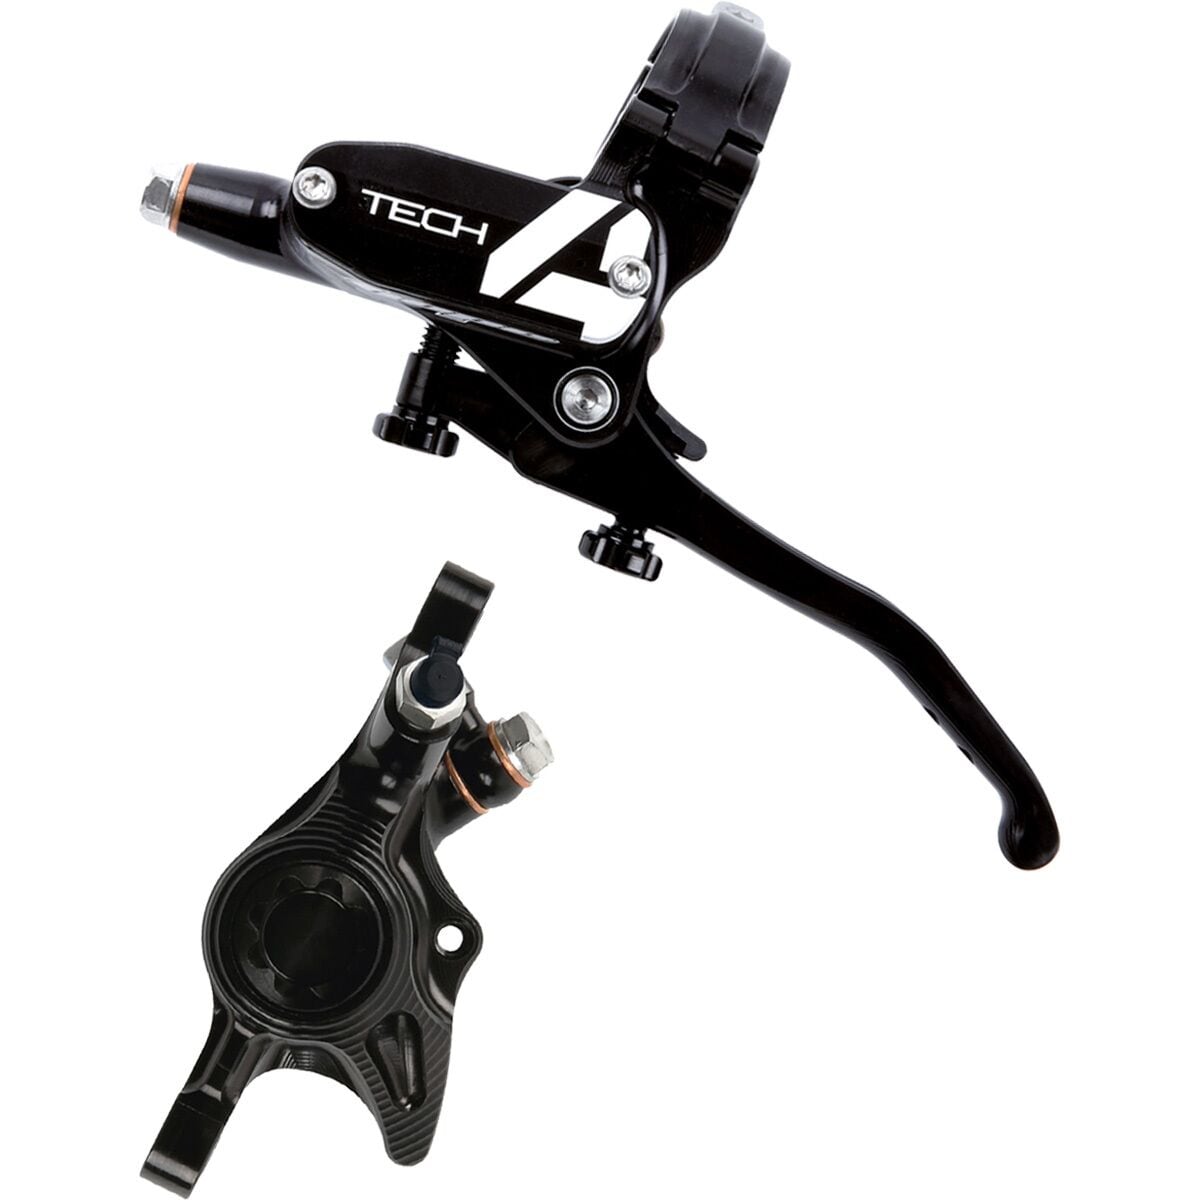 Hope Tech 4 X2 Disc Brake and Lever Set Black, Front Hydraulic Post Mount